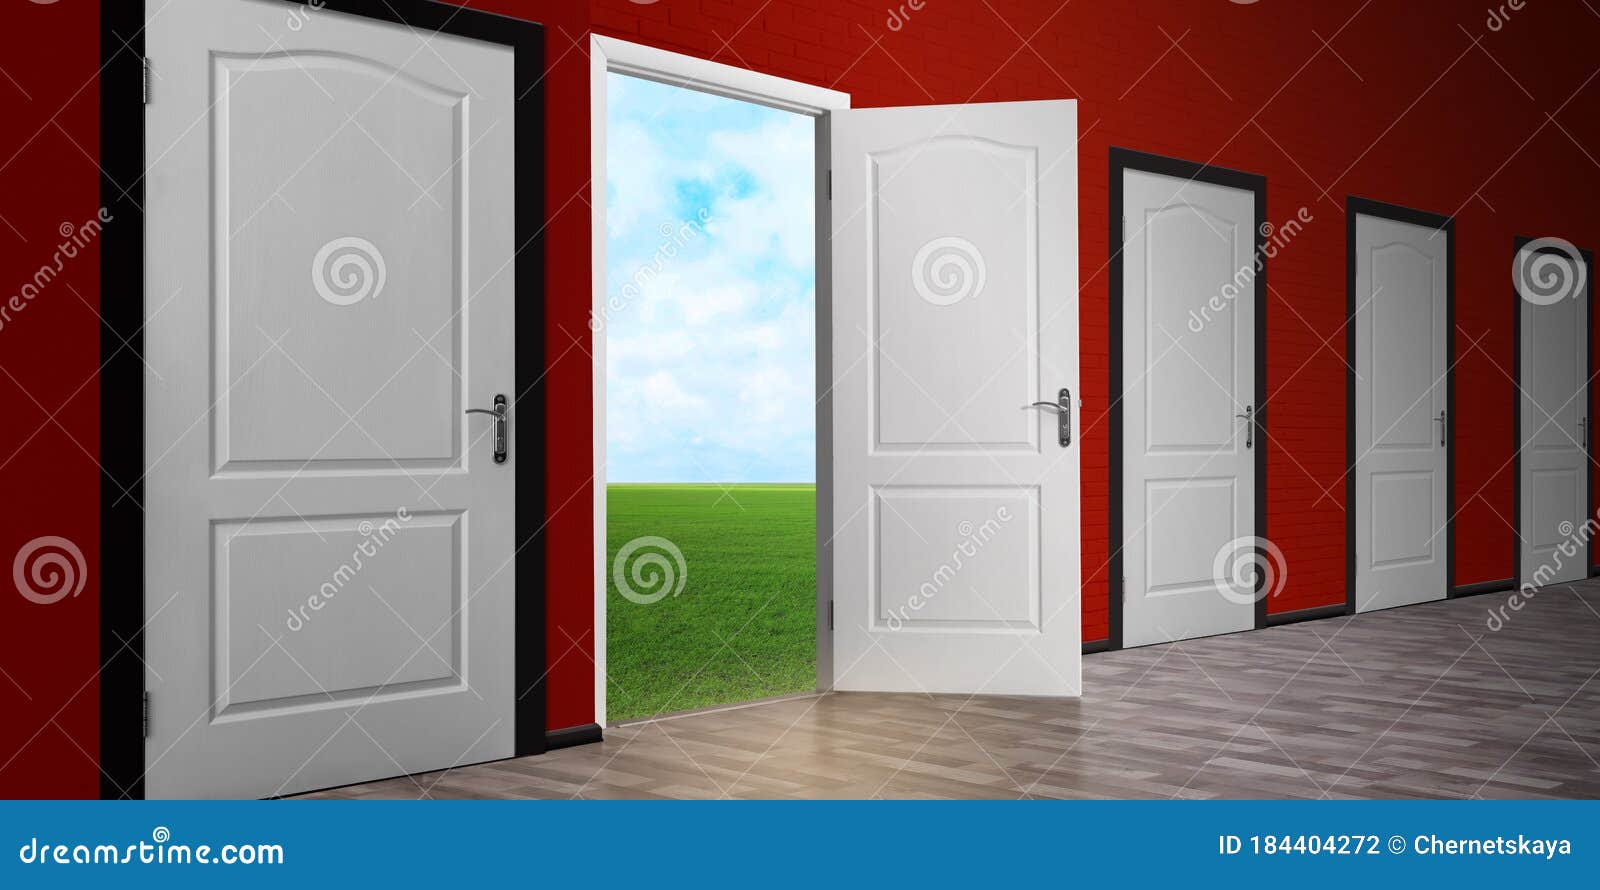 one open door among closed ones. concept of choice